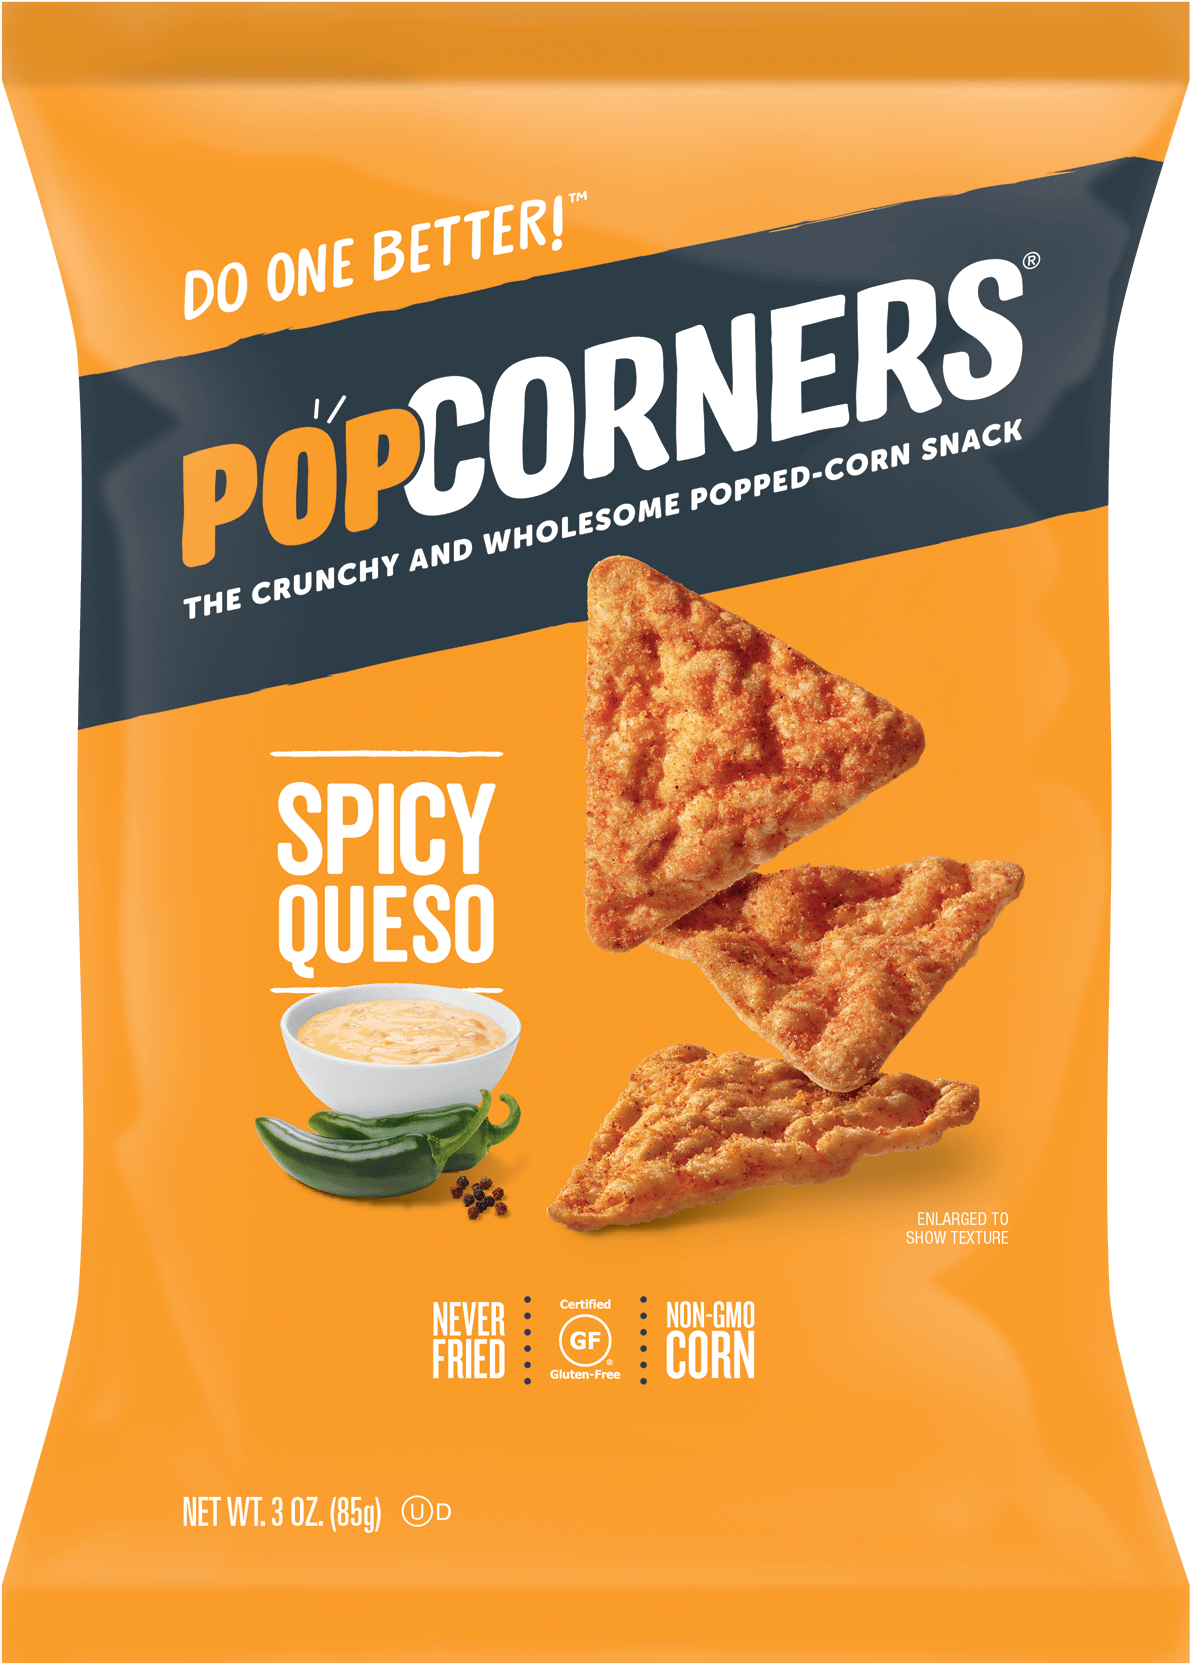 Spicy Queso - Popcorners Spicy Queso, Hd Png Download